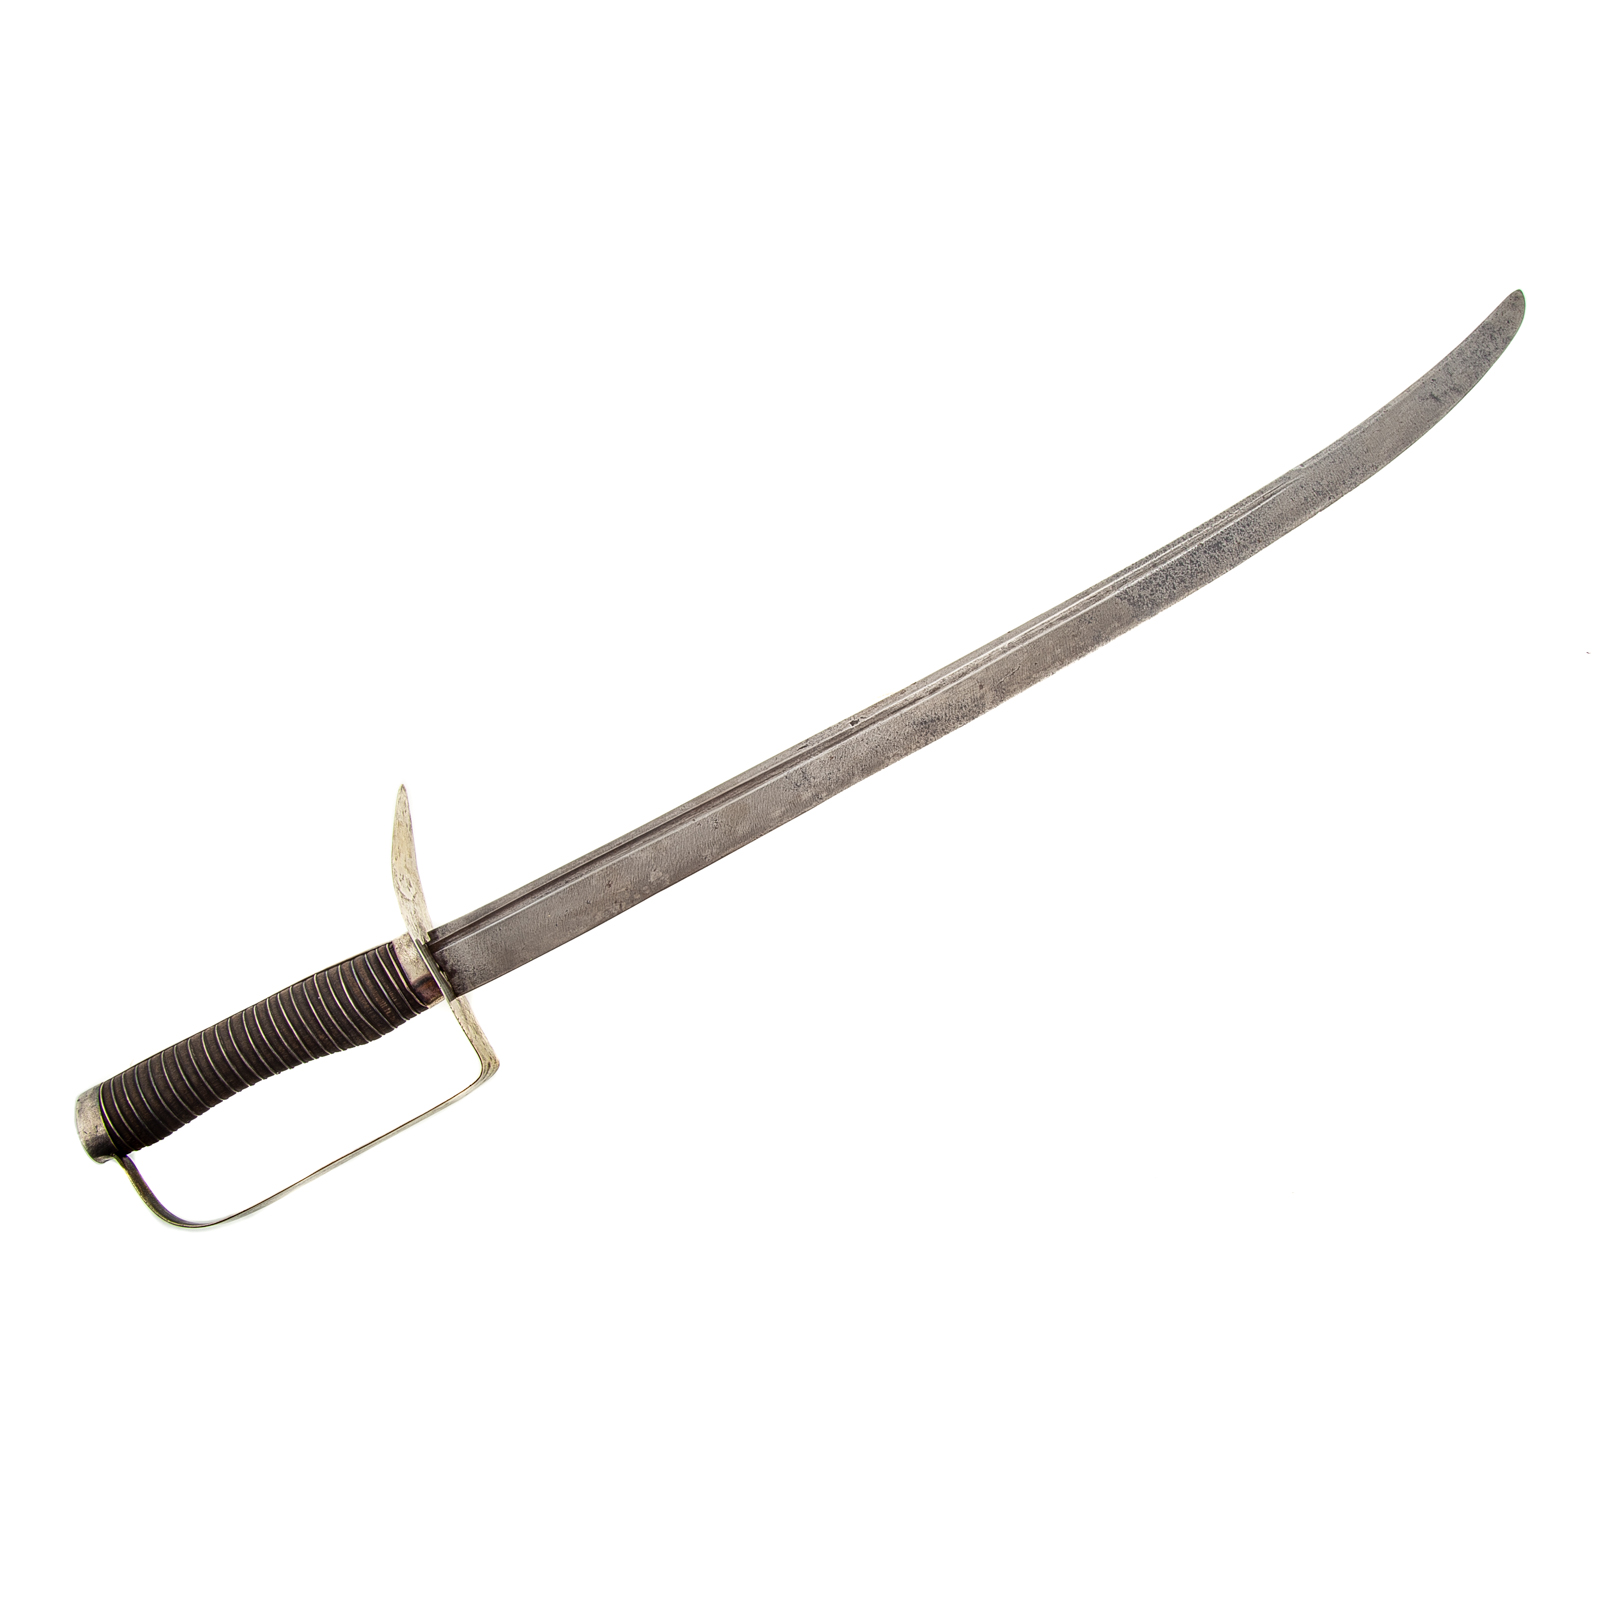 AMERICAN SILVER-HILTED SHORT SABRE